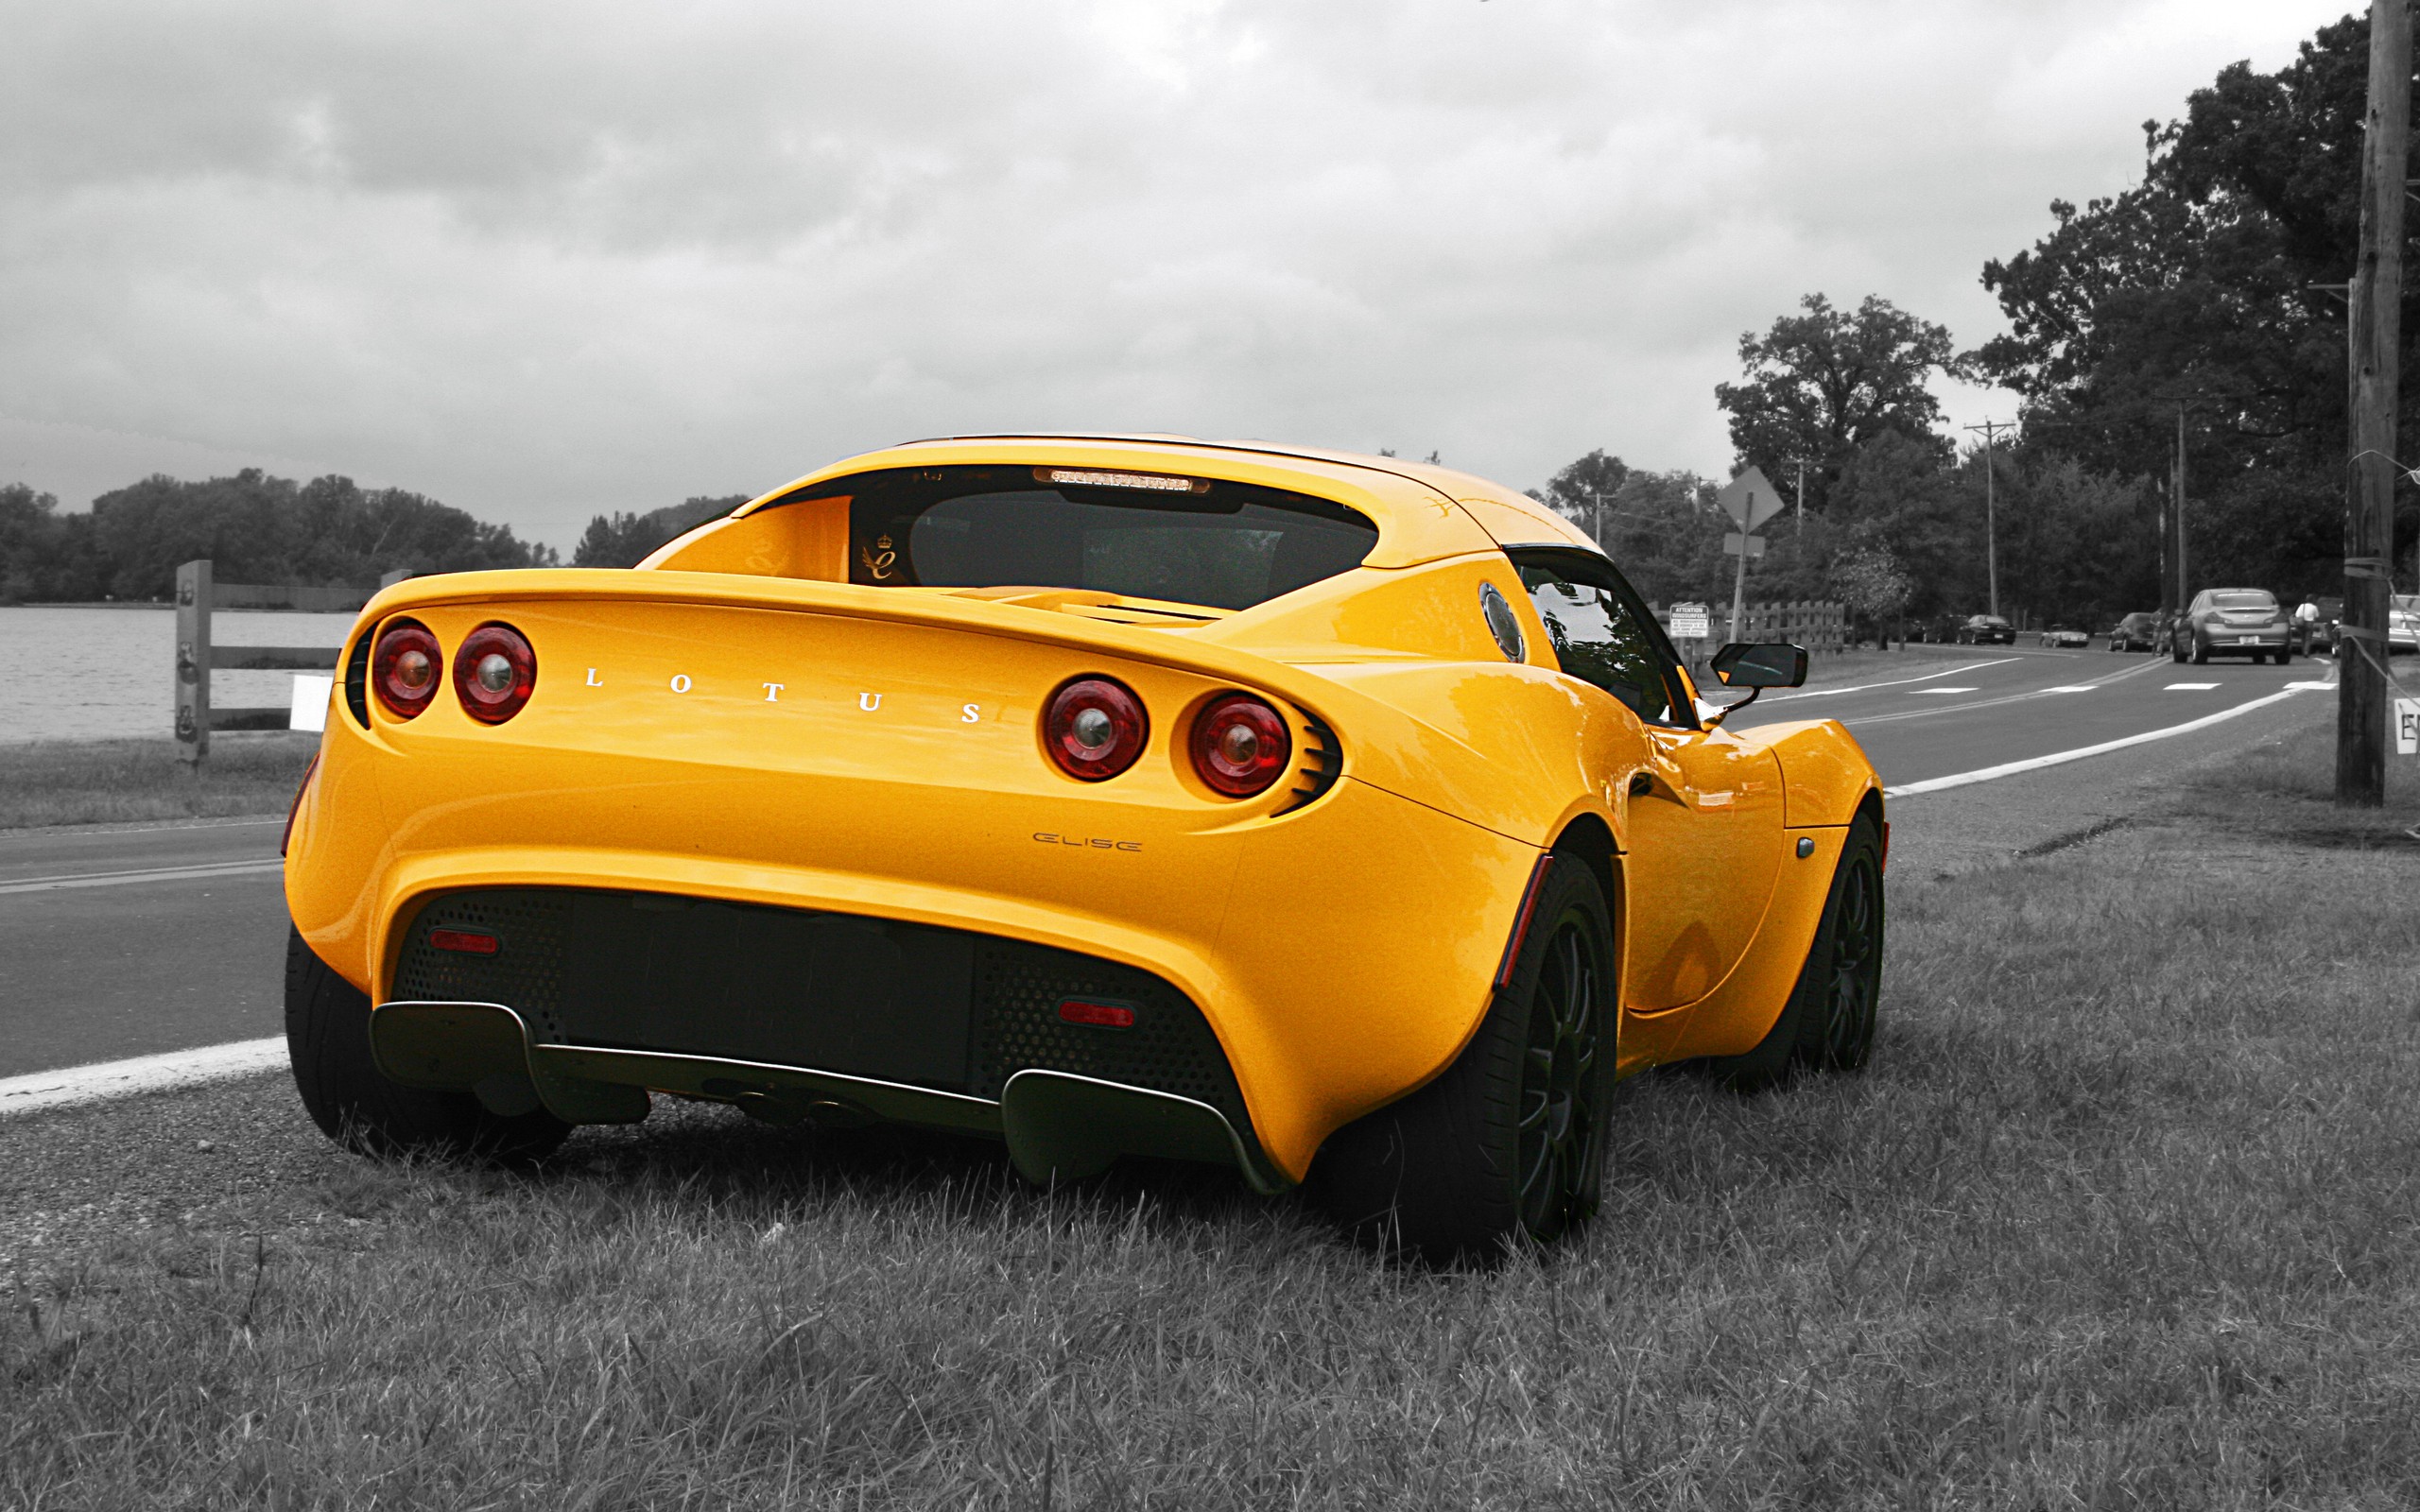 trees, Streets, Fences, Yellow, Cars, Grass, Vehicles, Lotus, Elise, Selective, Coloring, Lotus, Yellow, Cars Wallpaper